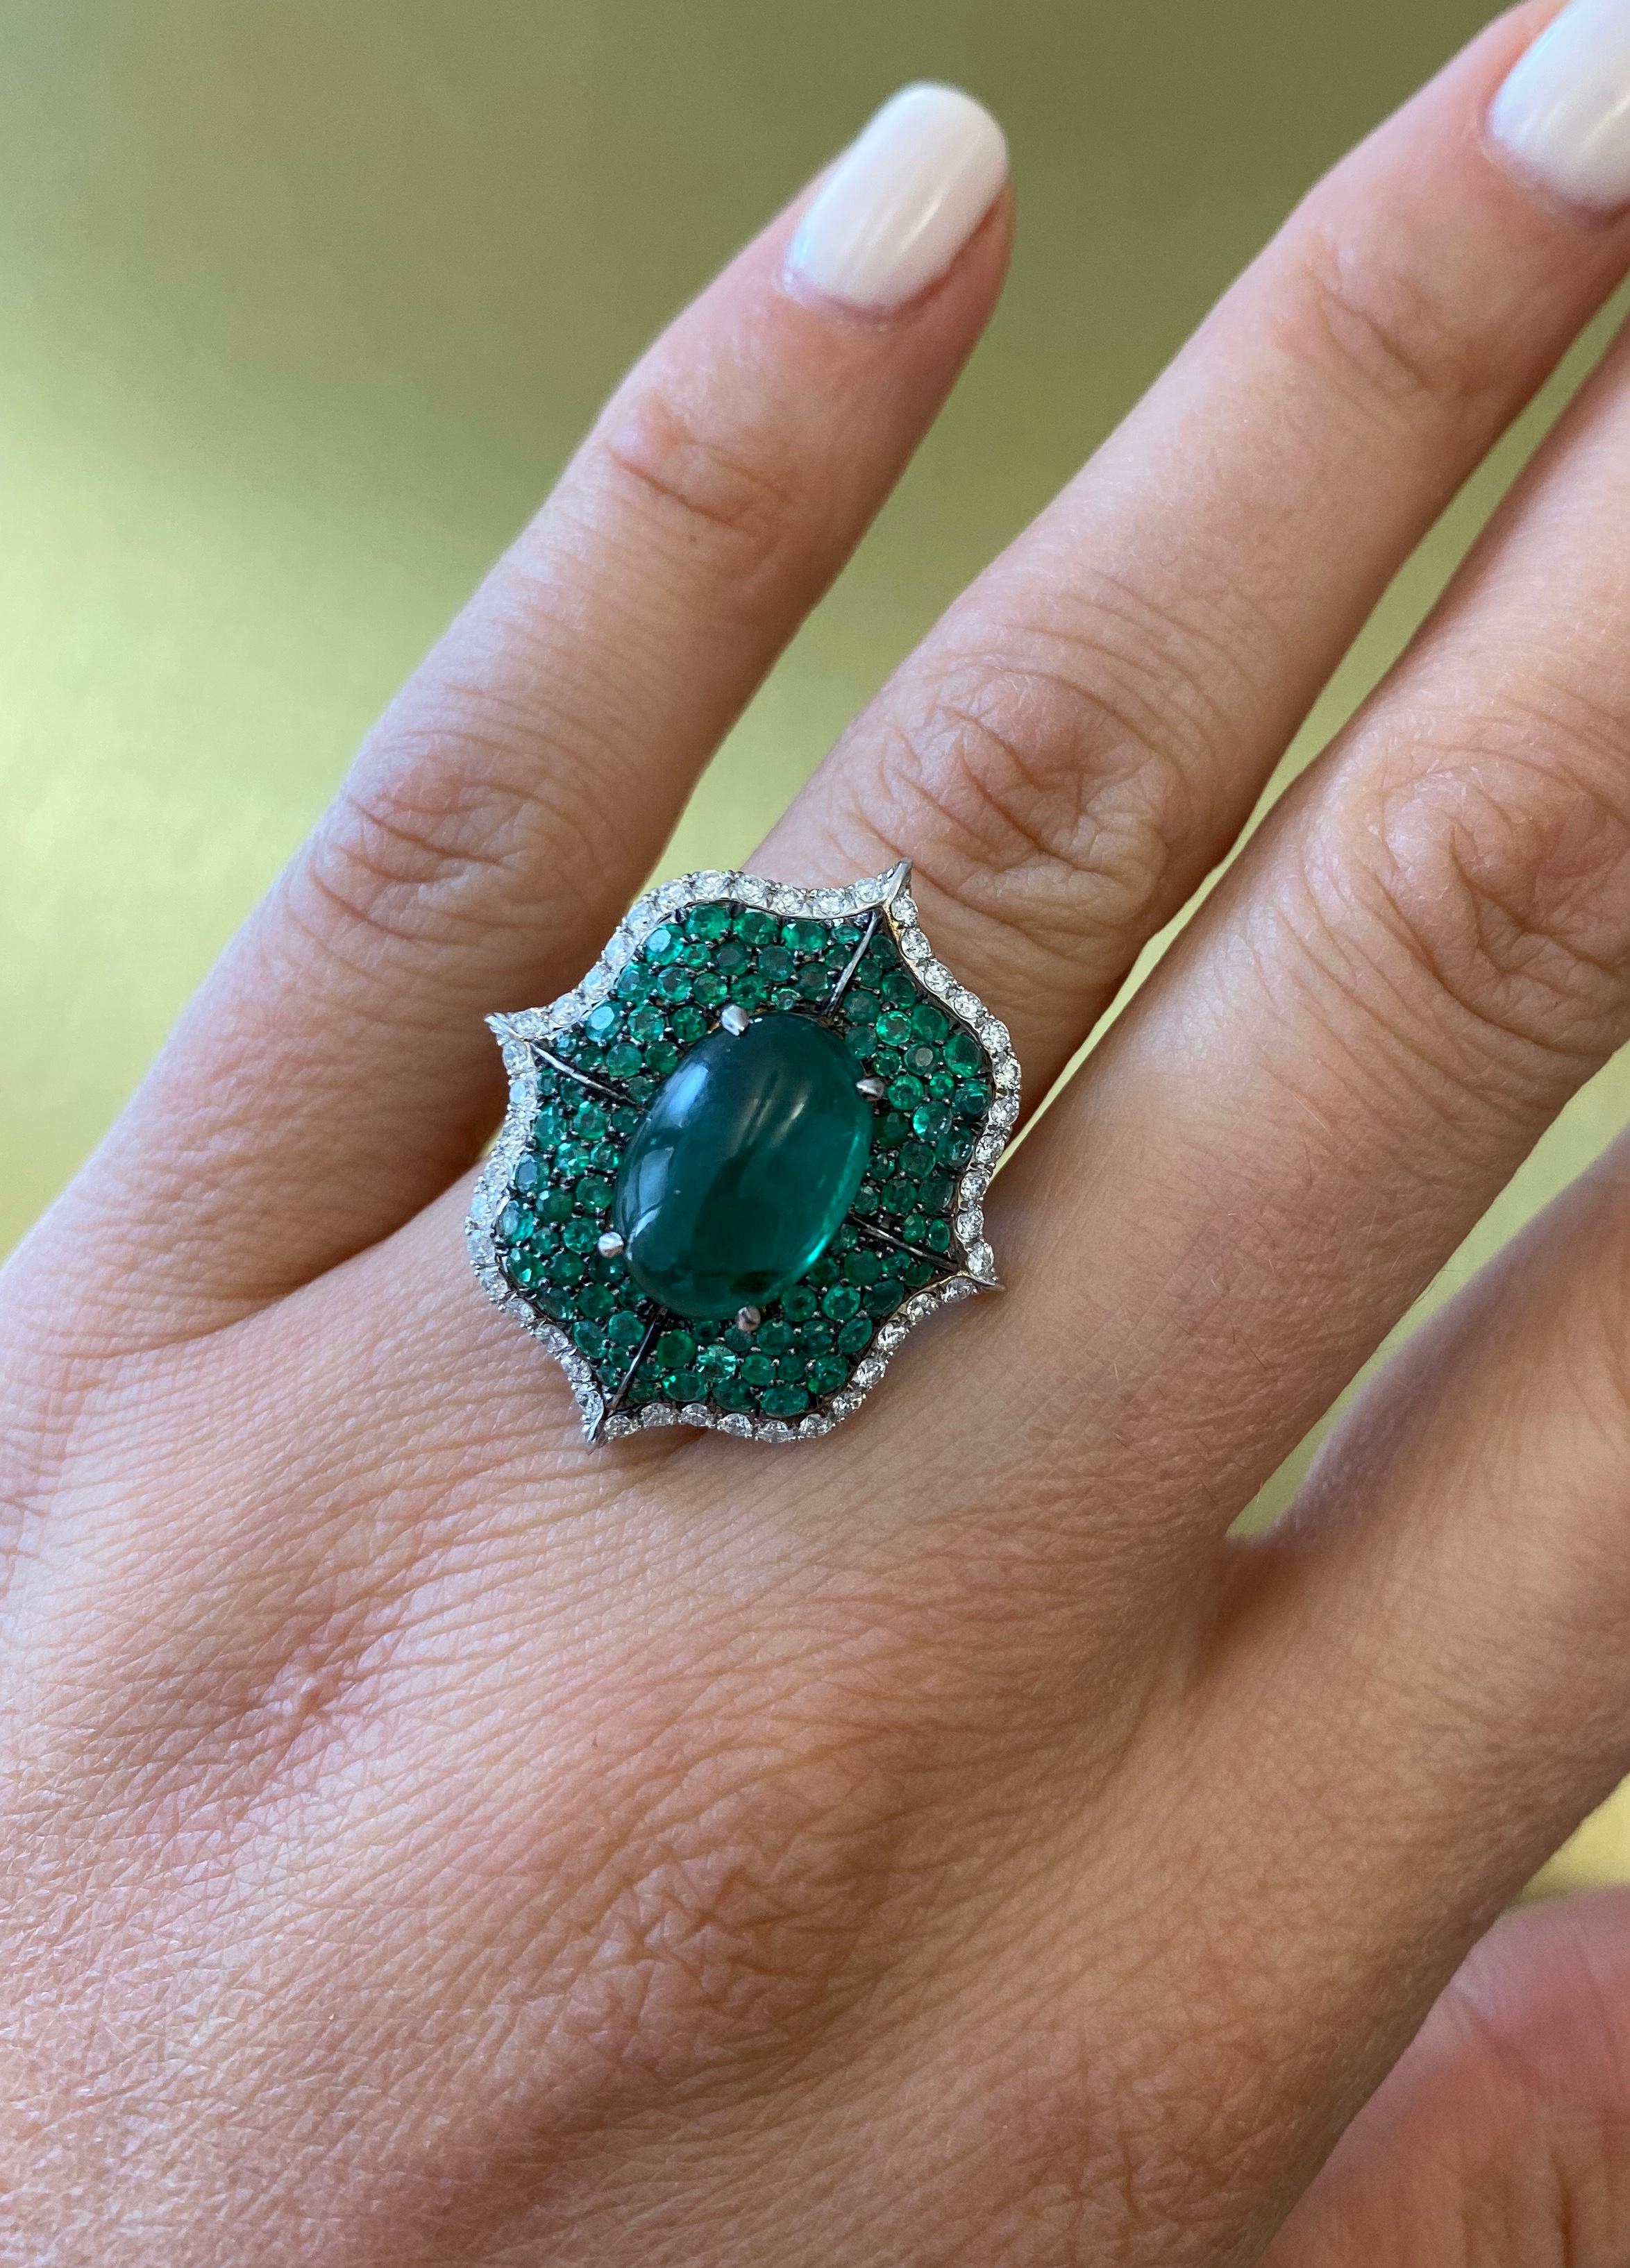 A Cabochon Emerald Ring accented by 102 pave diamonds and 92 pave green emeralds set in 18k white gold. Center Cabachon Emerald is 3.64ct. Total carat weight of Diamonds is 0.90cts and total carat weight of emeralds is 1.25cts. This piece is